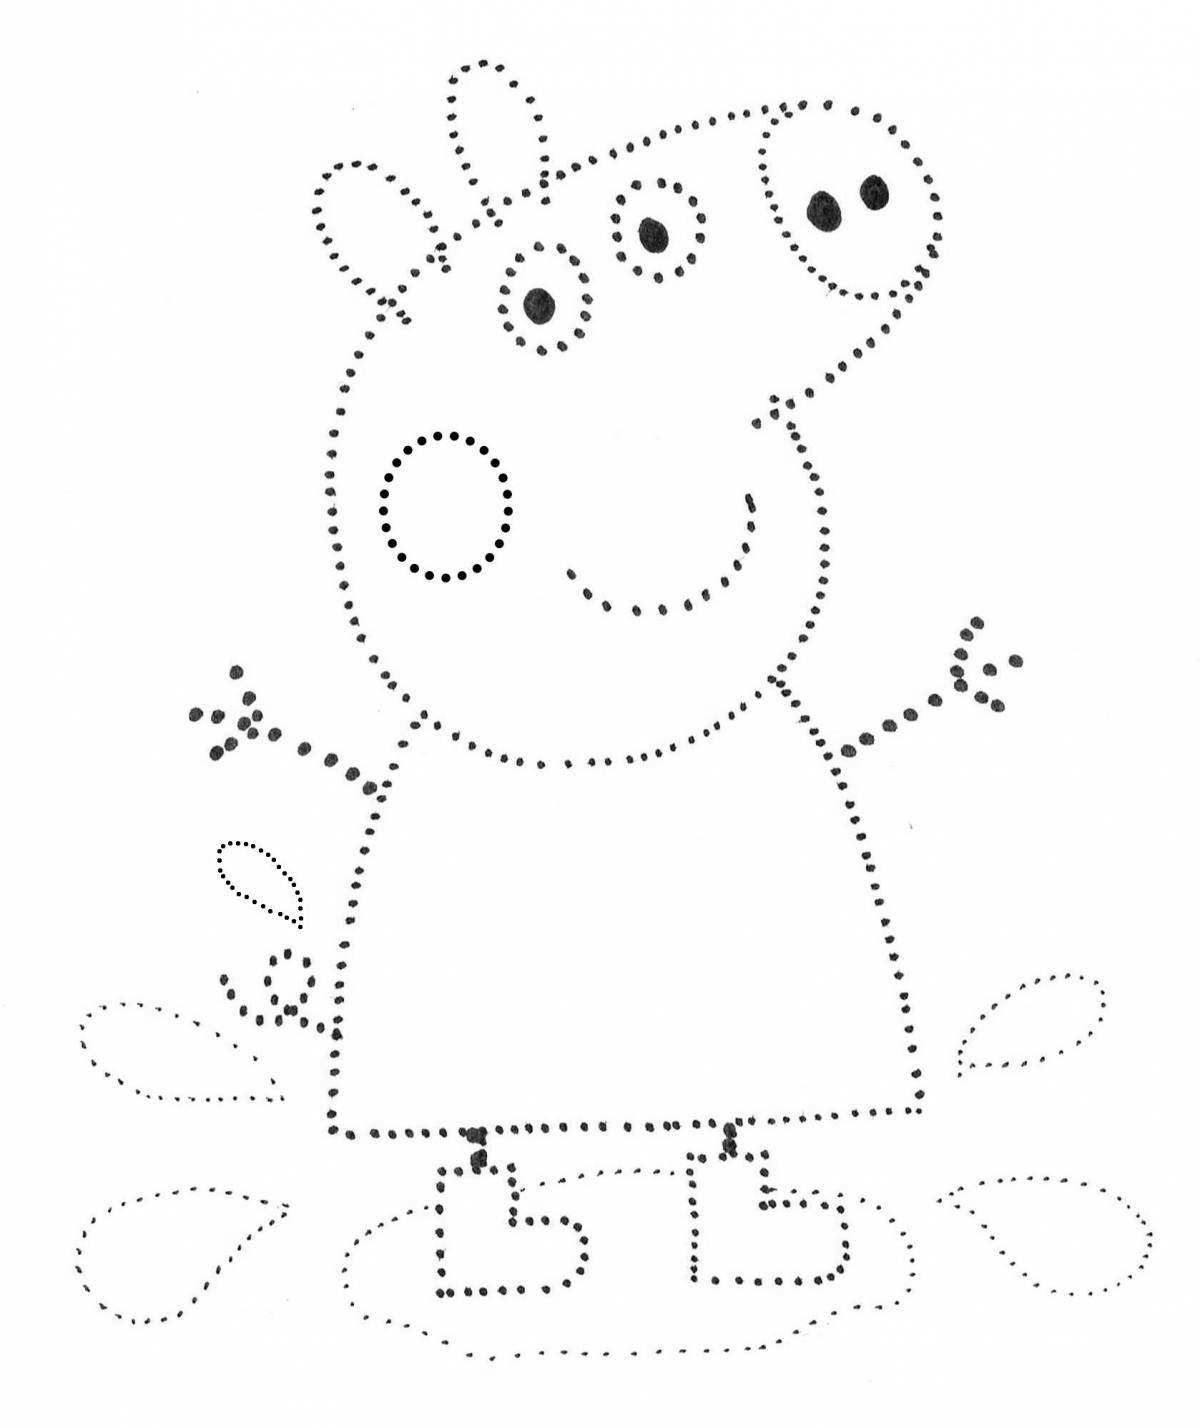 By dots for children 4 5 years old #9